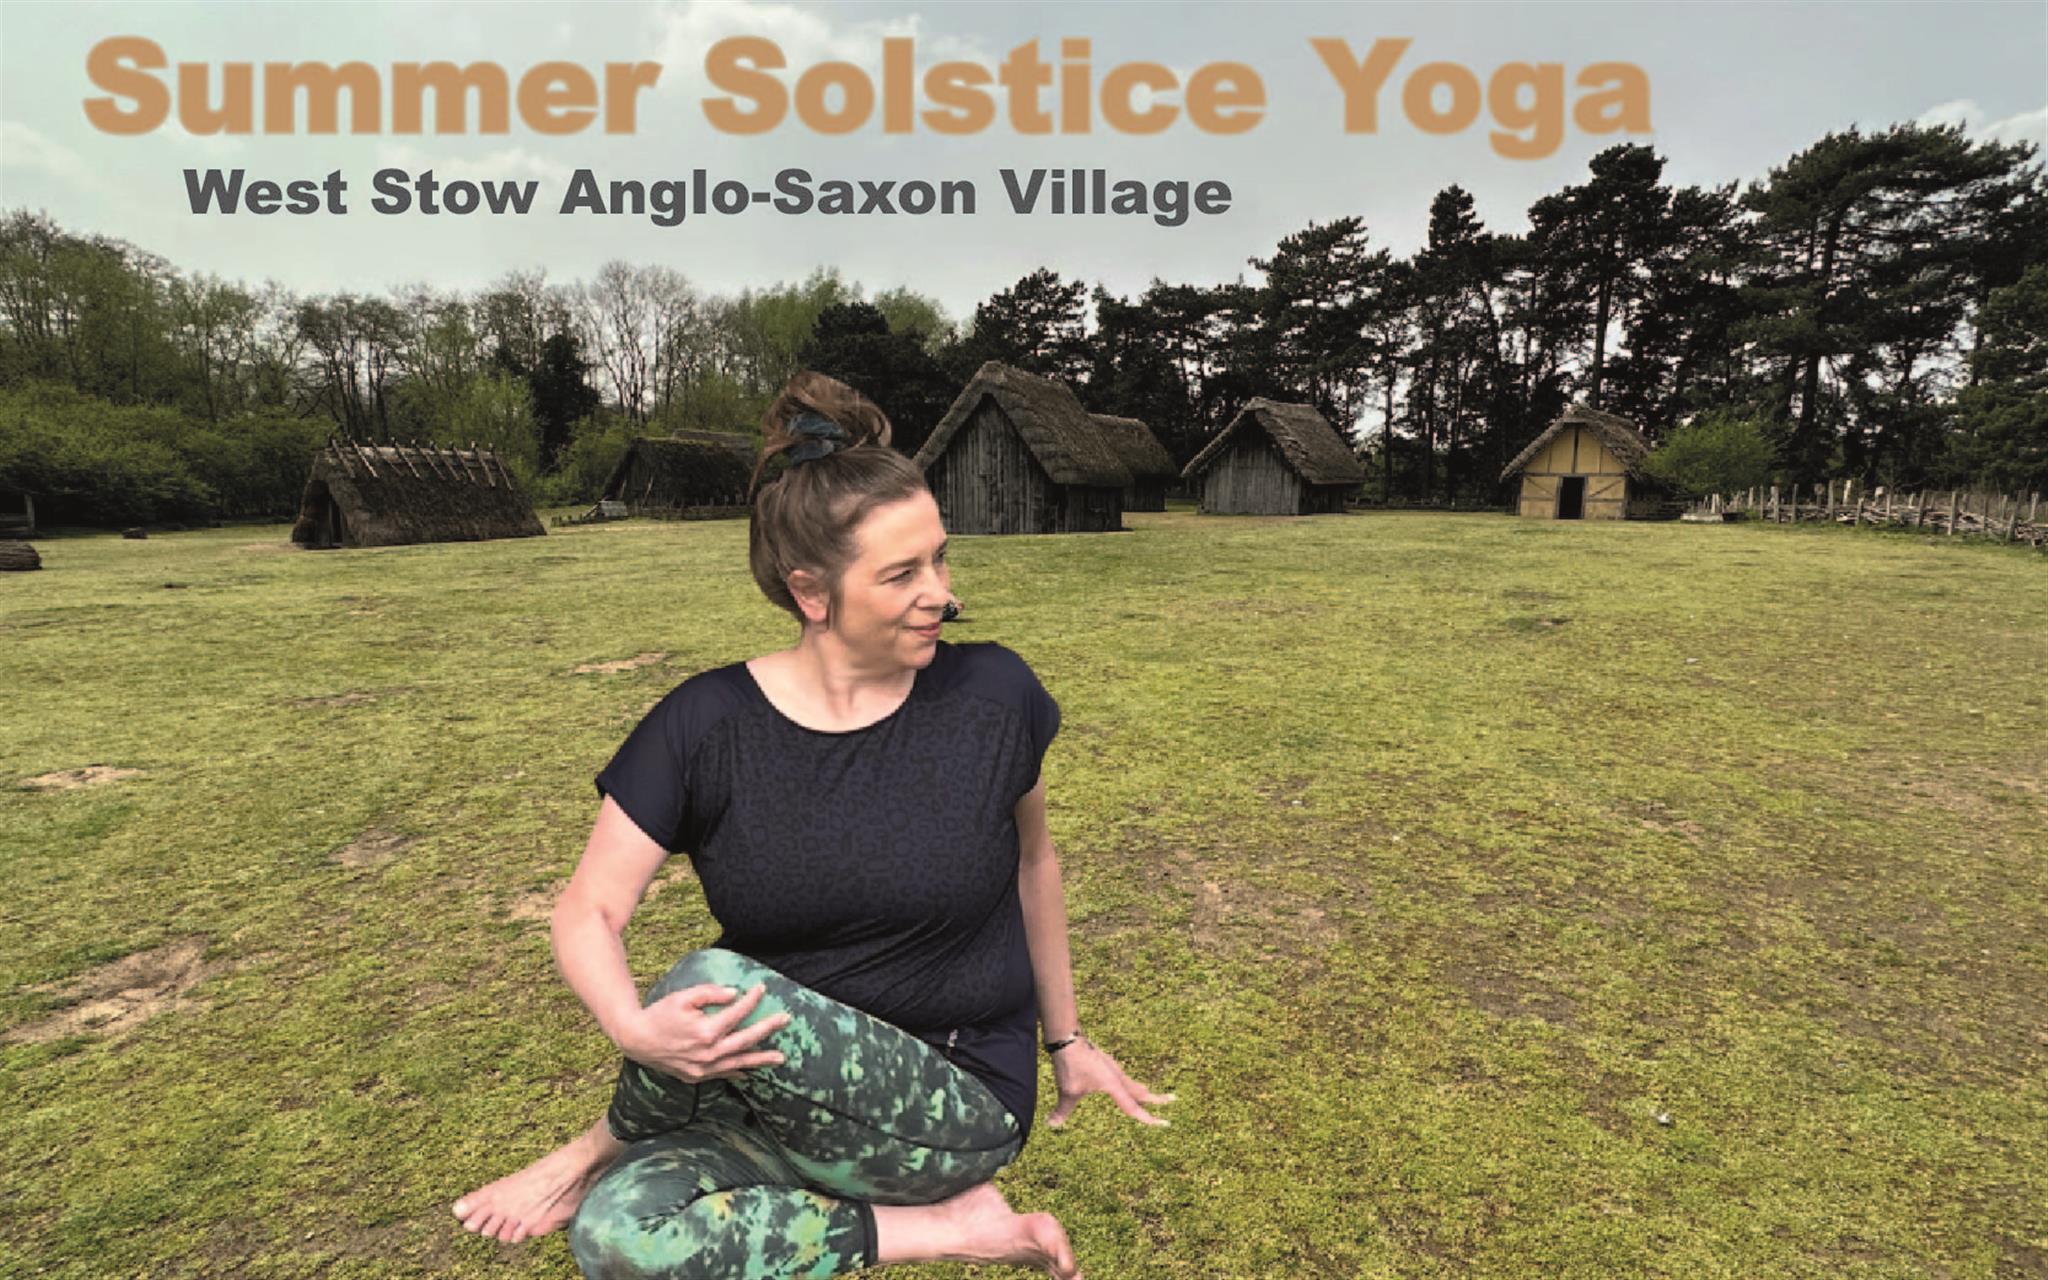 Summer Solstice at West Stow